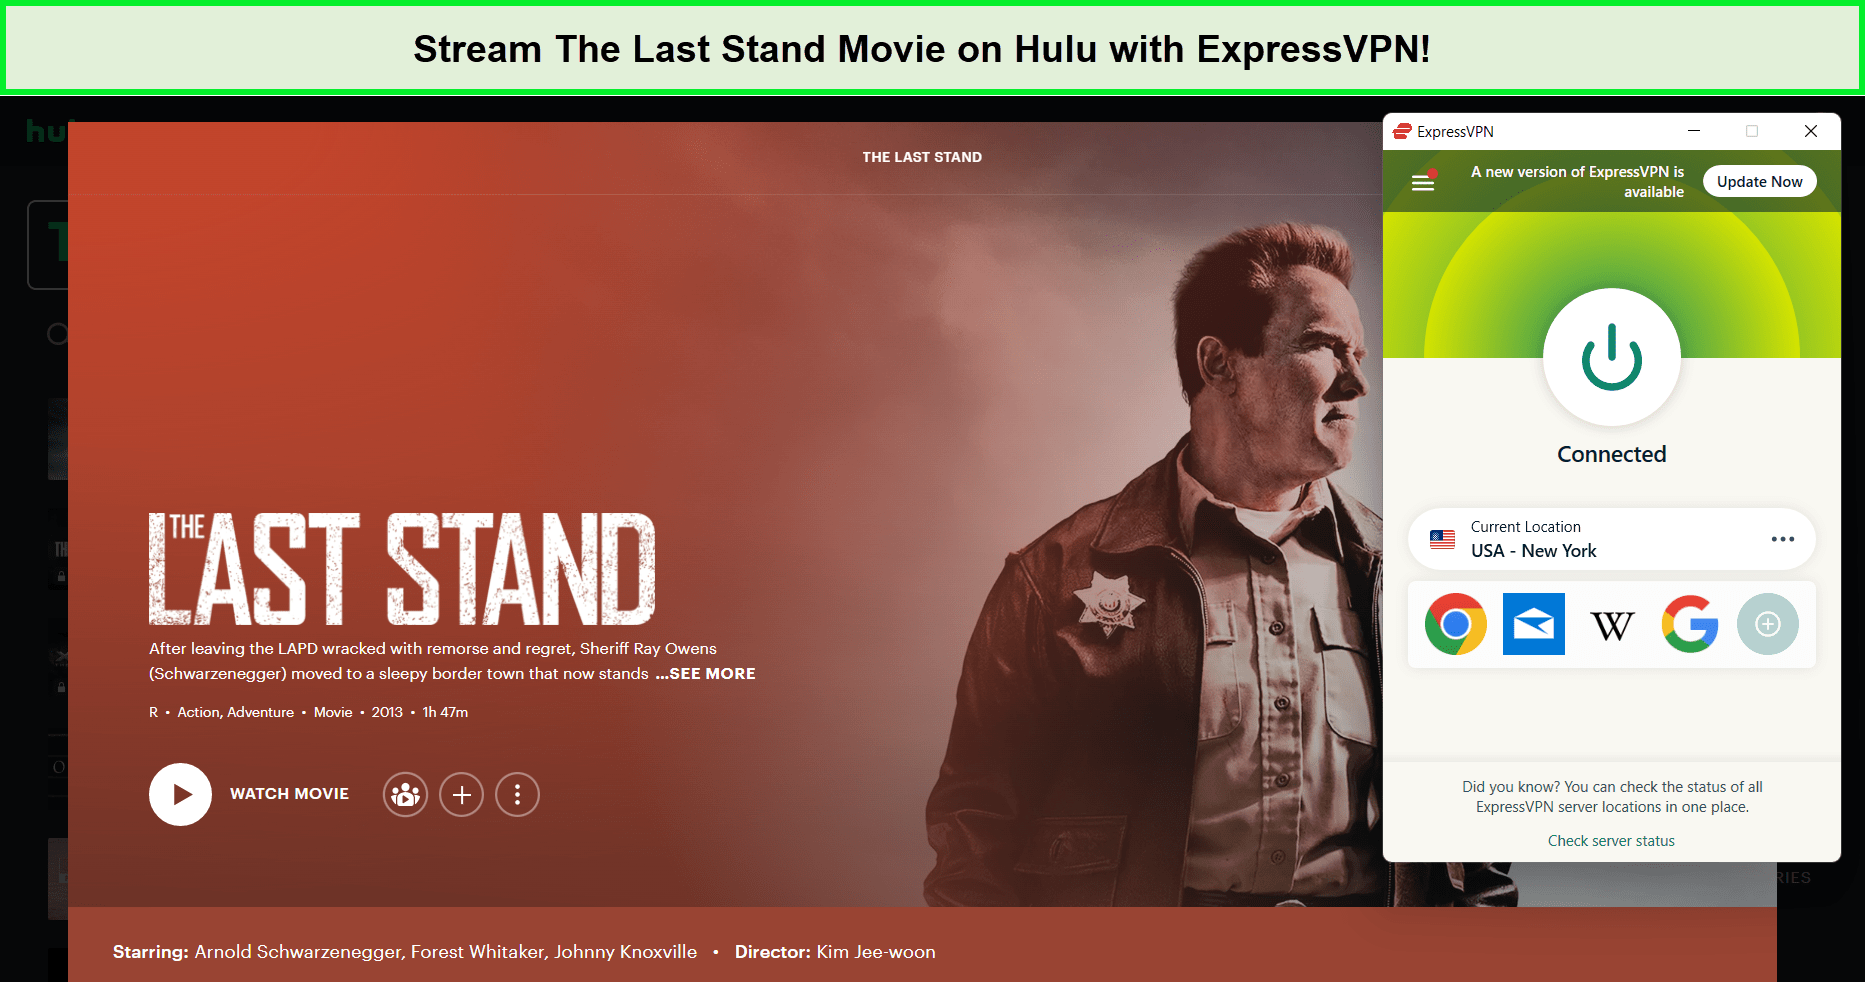 With-ExpressVPN-Watch-The-Last-Stand-Movie-on-Hulu-in-Australia